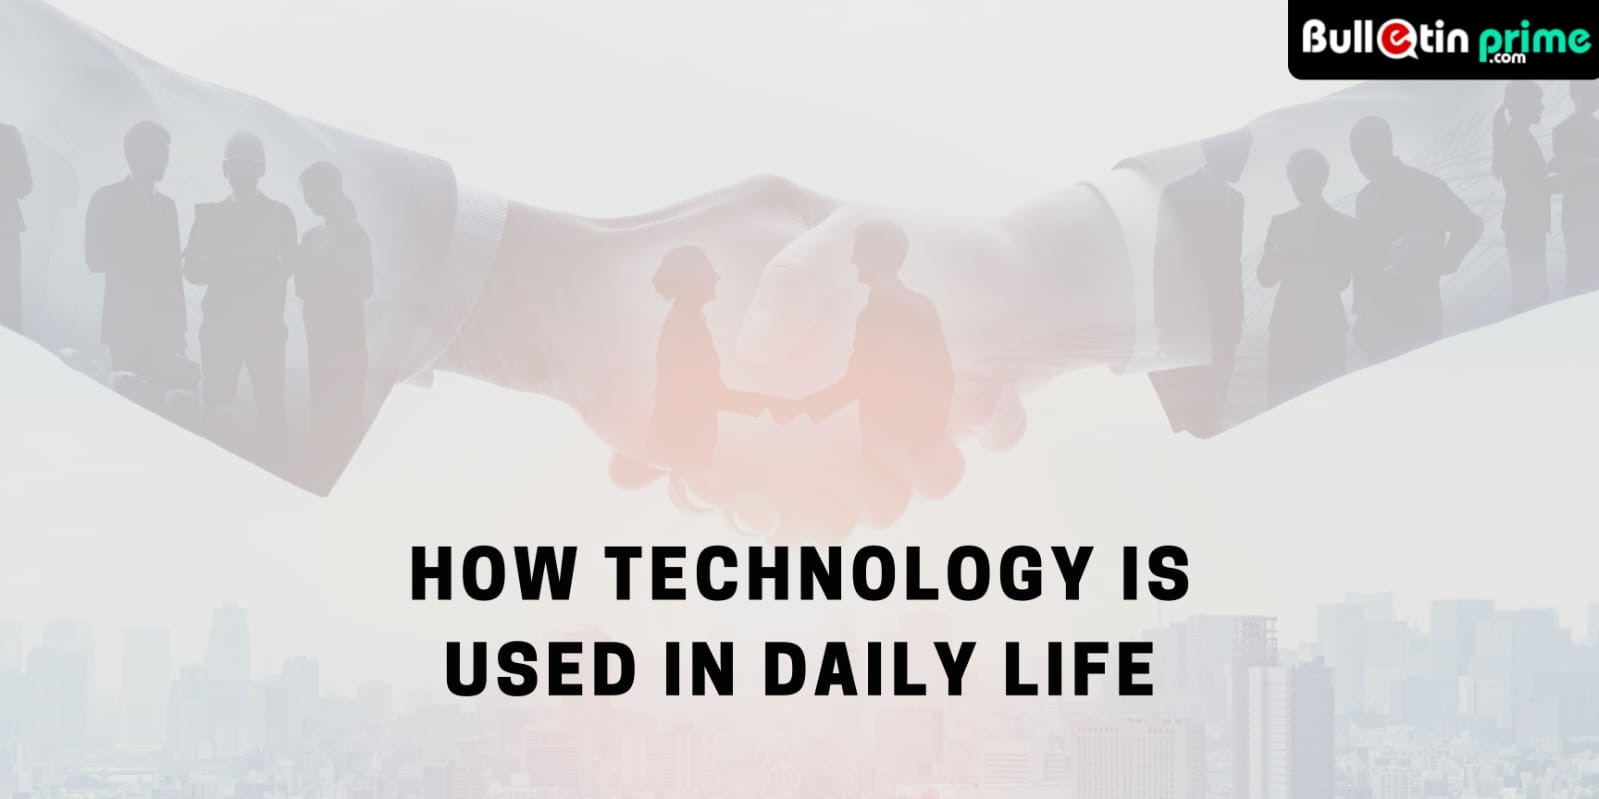 How technology is used in daily life